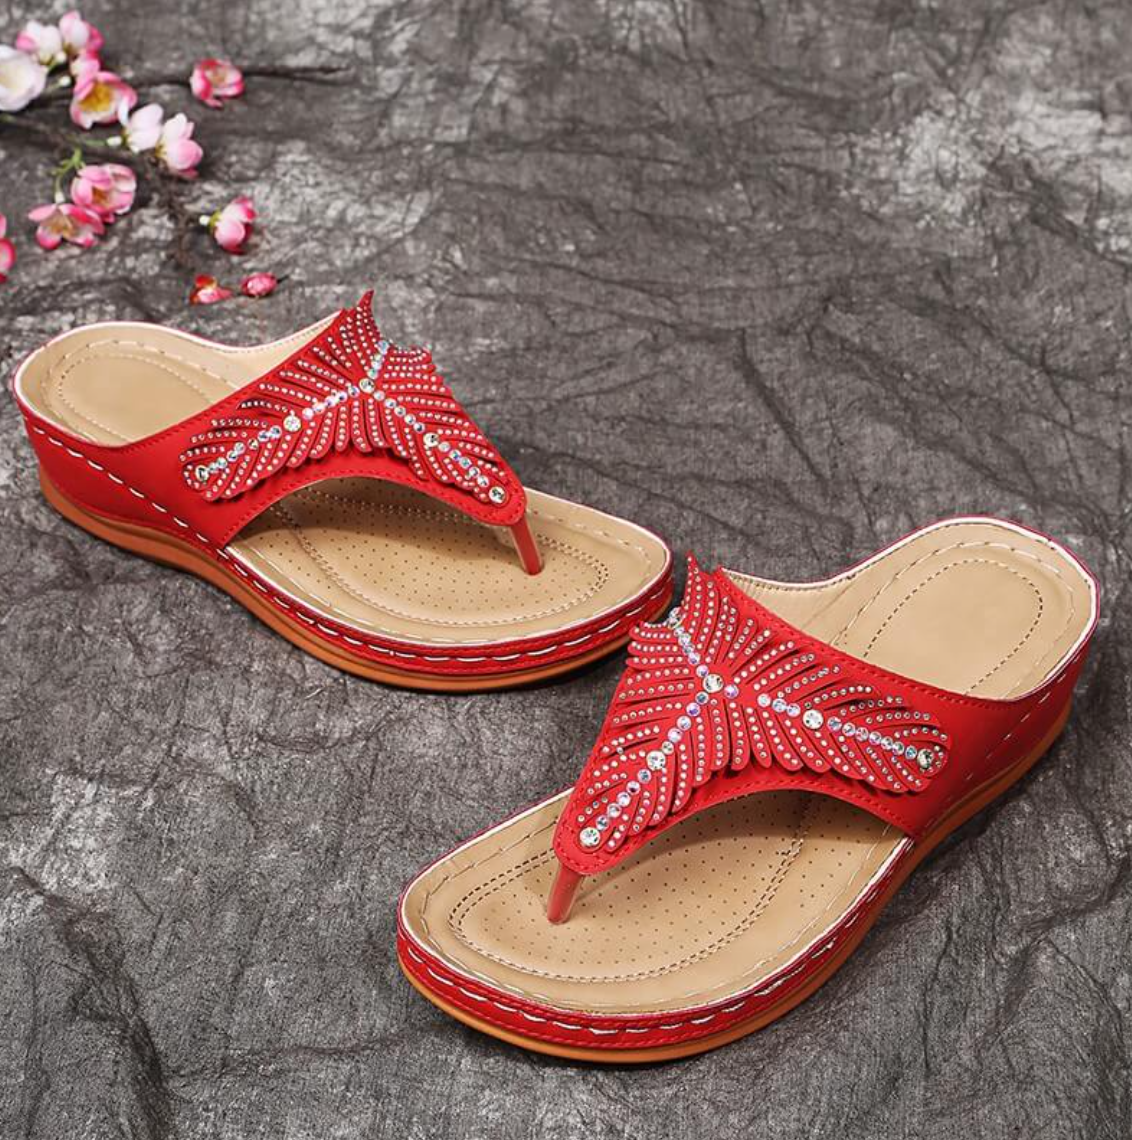 🔥On This Week Sale OFF 70%🔥2023 Women Casual Sandals, Crystal Rome Fashion Clip Toe Slippers